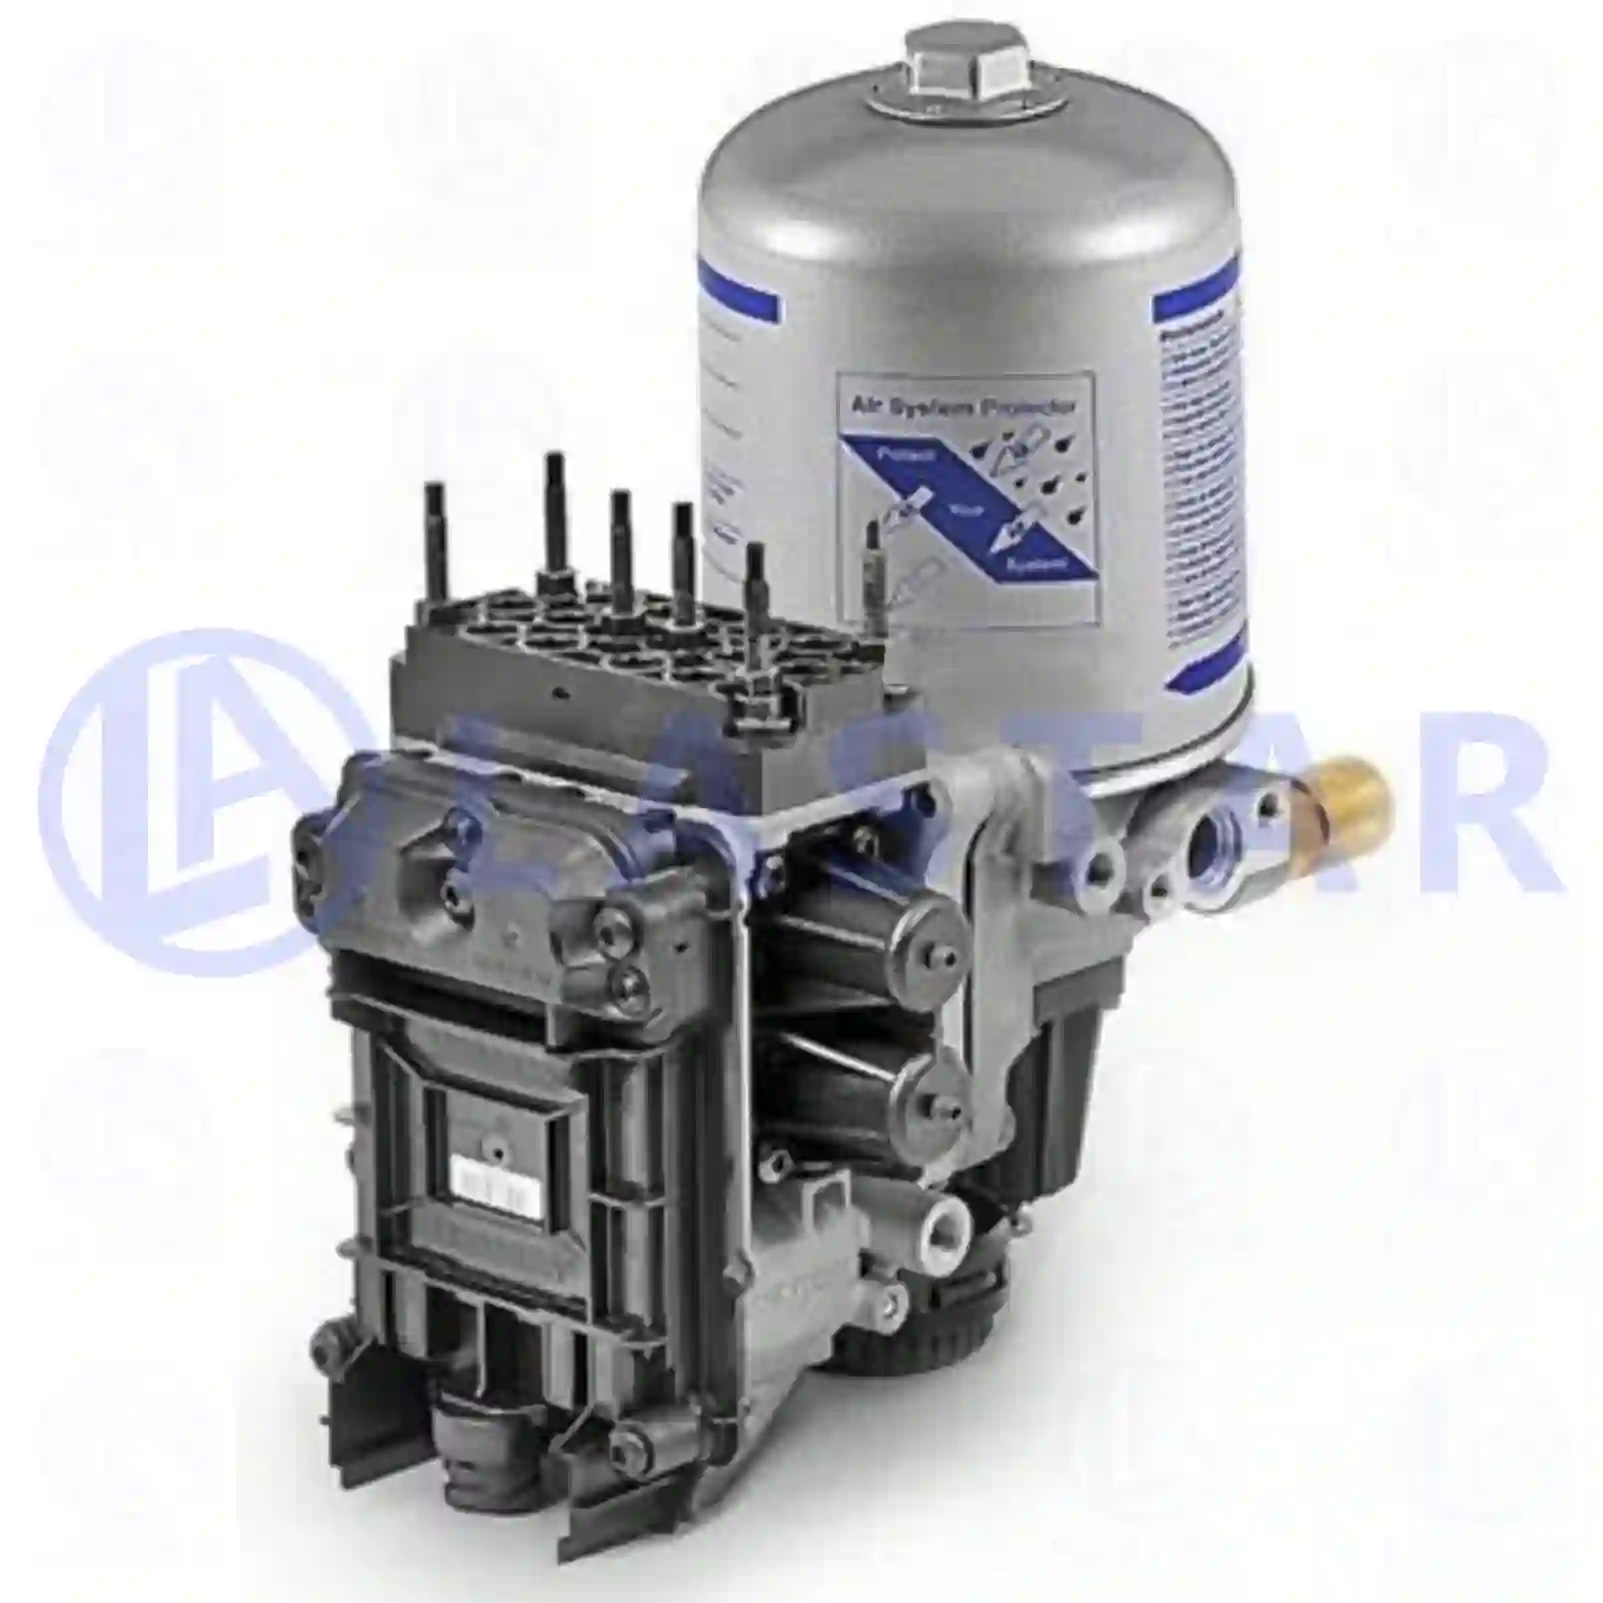 Air dryer, complete with valve, 77713928, 1474663, 1535829, 1543224, 1738295, 1753577, 1763425, 1770184, 1796161, 1897631, 1928589, 1941953, 2063357, 2089579, 2148069, 2308777, 573715 ||  77713928 Lastar Spare Part | Truck Spare Parts, Auotomotive Spare Parts Air dryer, complete with valve, 77713928, 1474663, 1535829, 1543224, 1738295, 1753577, 1763425, 1770184, 1796161, 1897631, 1928589, 1941953, 2063357, 2089579, 2148069, 2308777, 573715 ||  77713928 Lastar Spare Part | Truck Spare Parts, Auotomotive Spare Parts